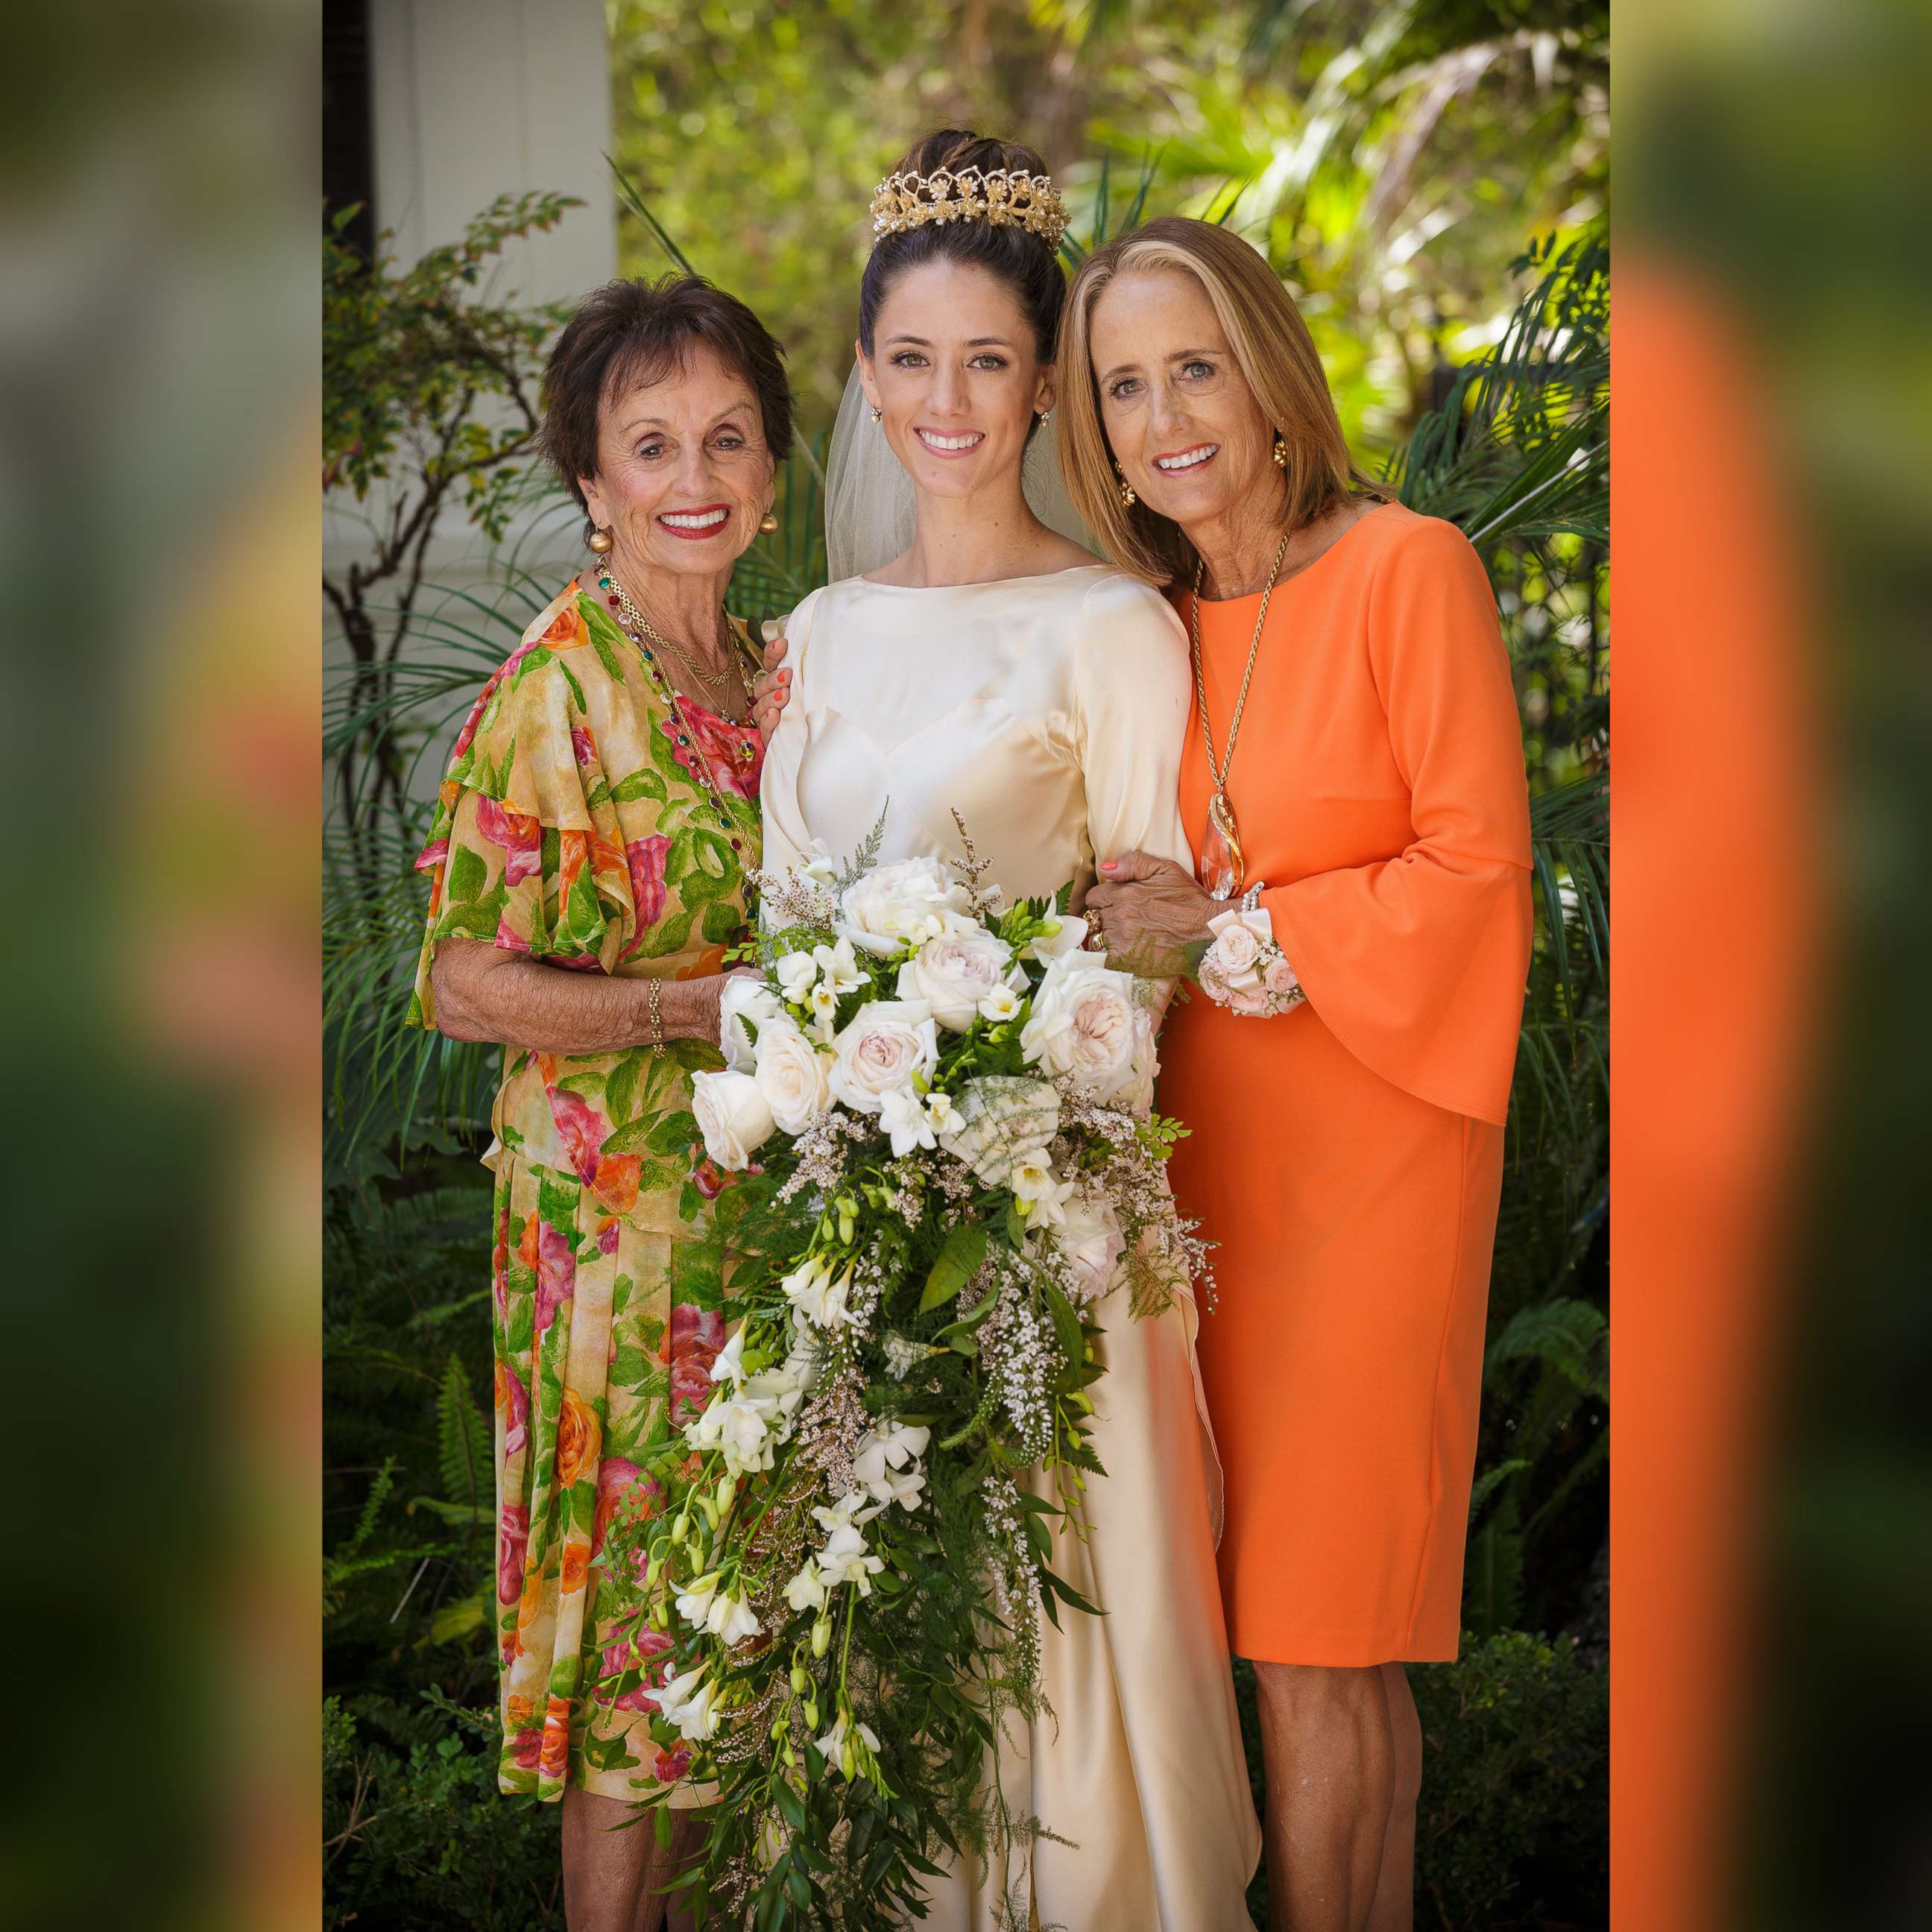 PHOTO: Pilar O'Hara Kassouf poses with her mother and grandmother on her September 2017 wedding day.